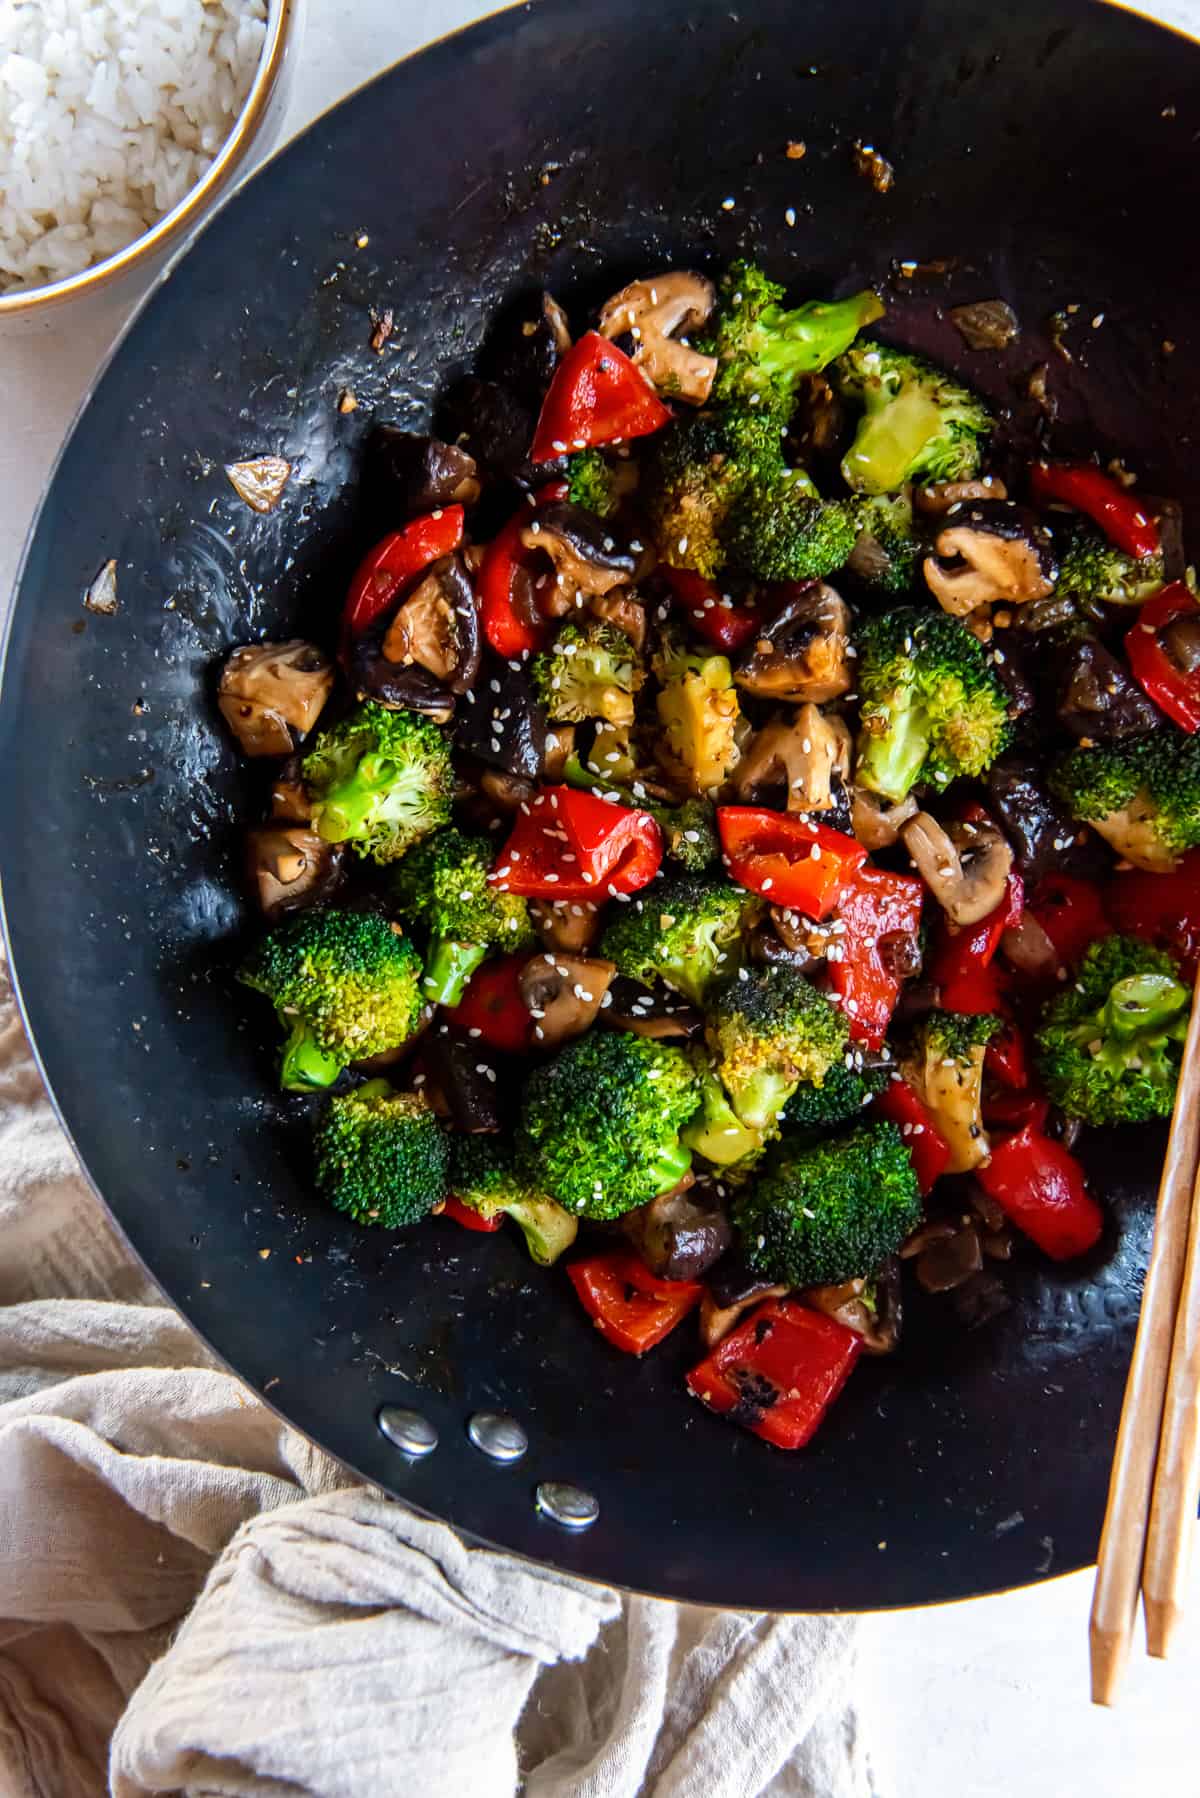 Colorful stir fried vegetables in a wok with chopsticks.